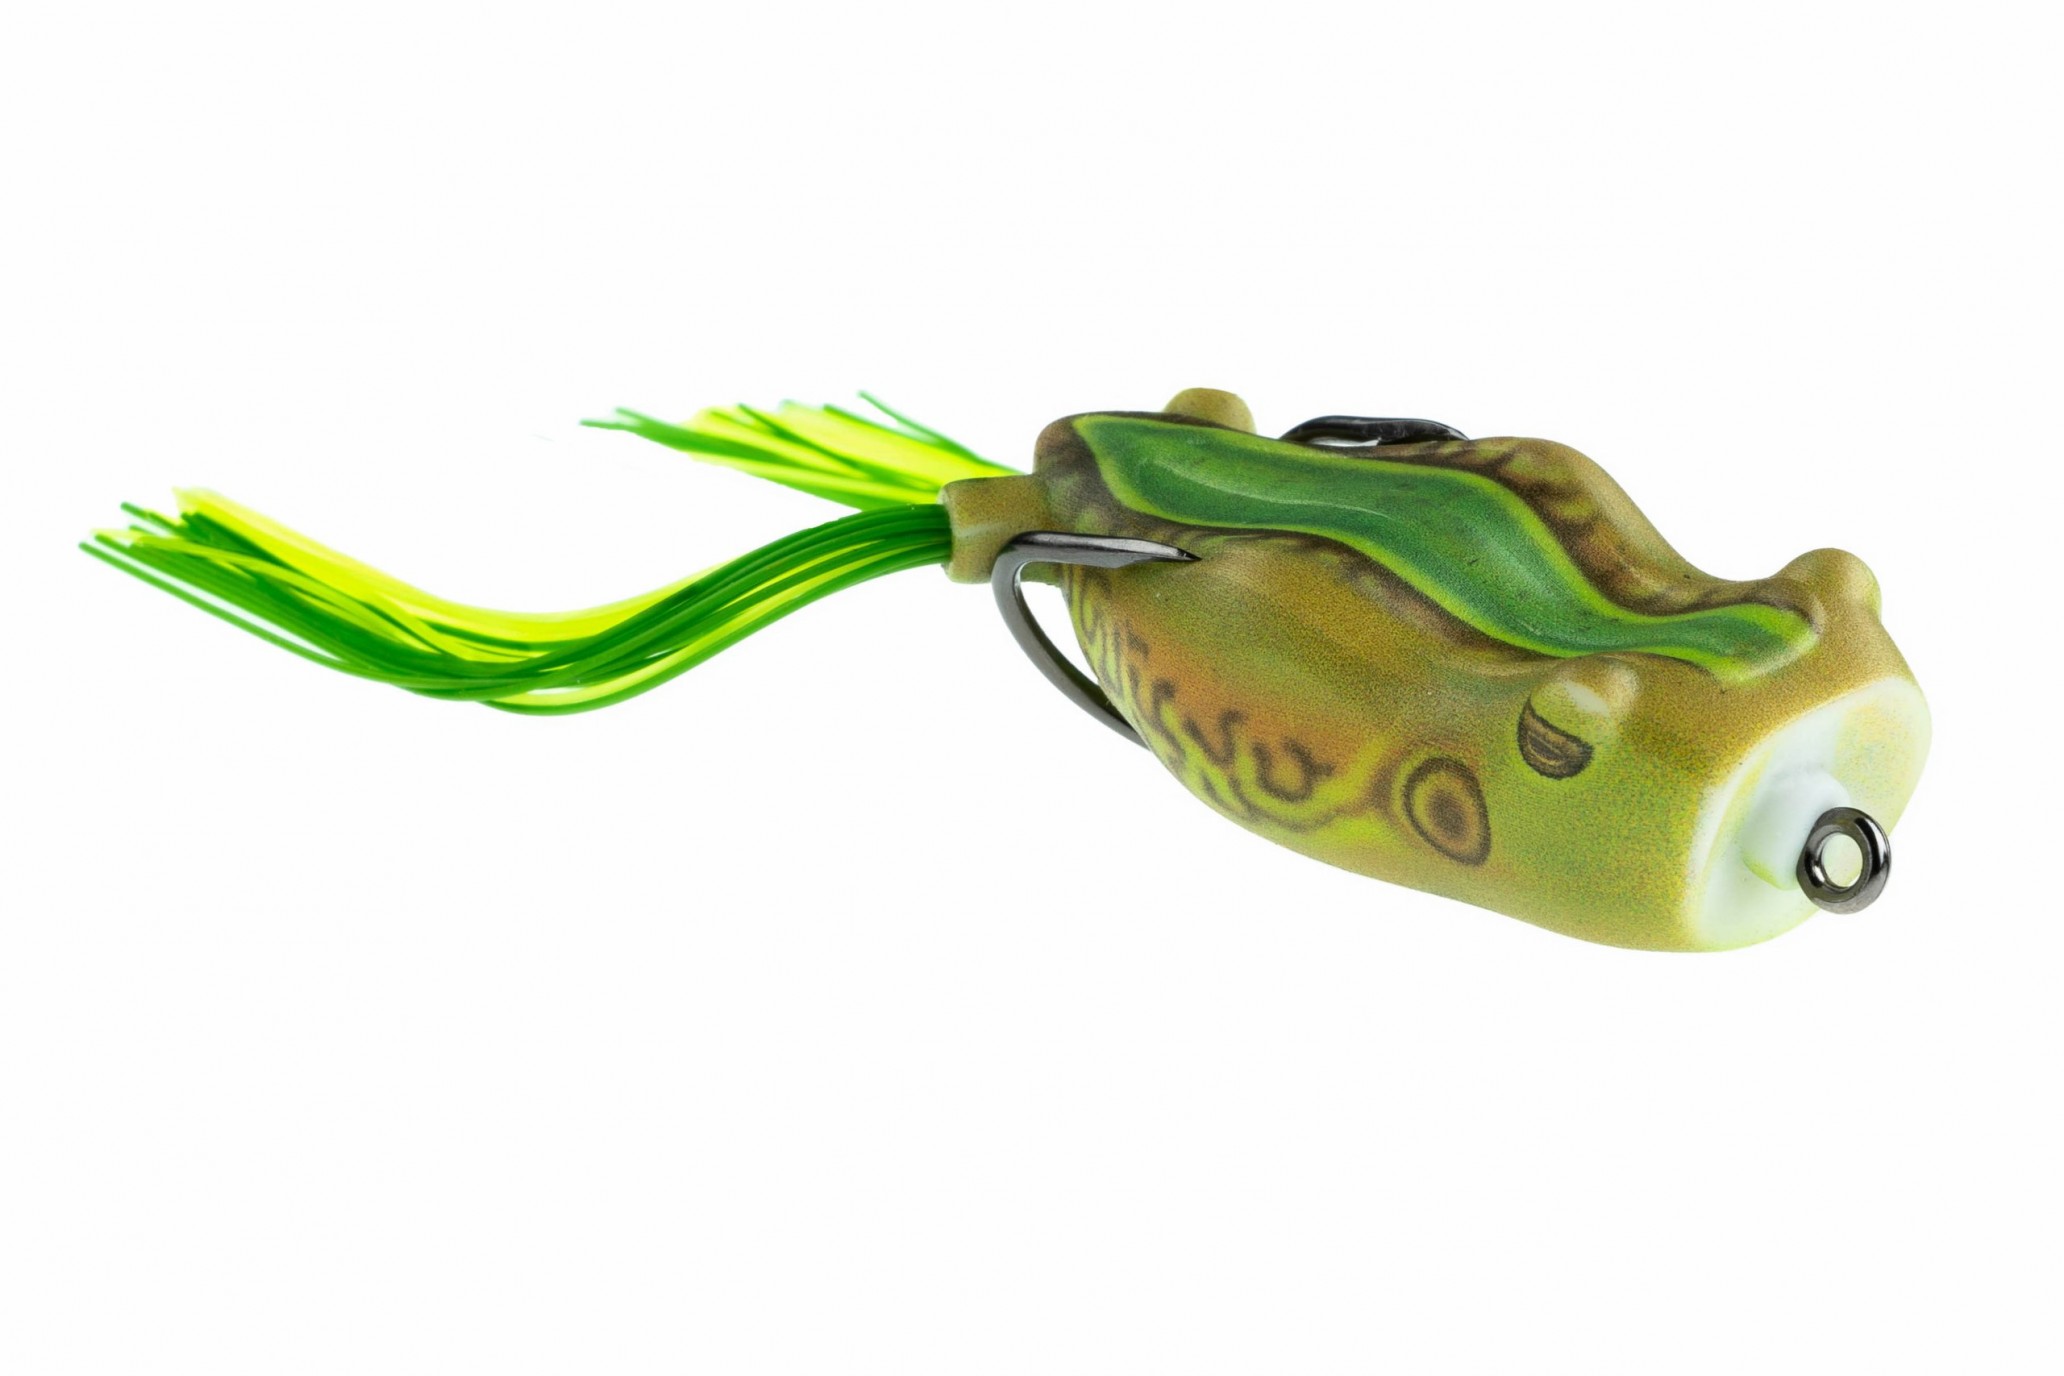 Scum Frog Launch Frog XS – Anglers Channel